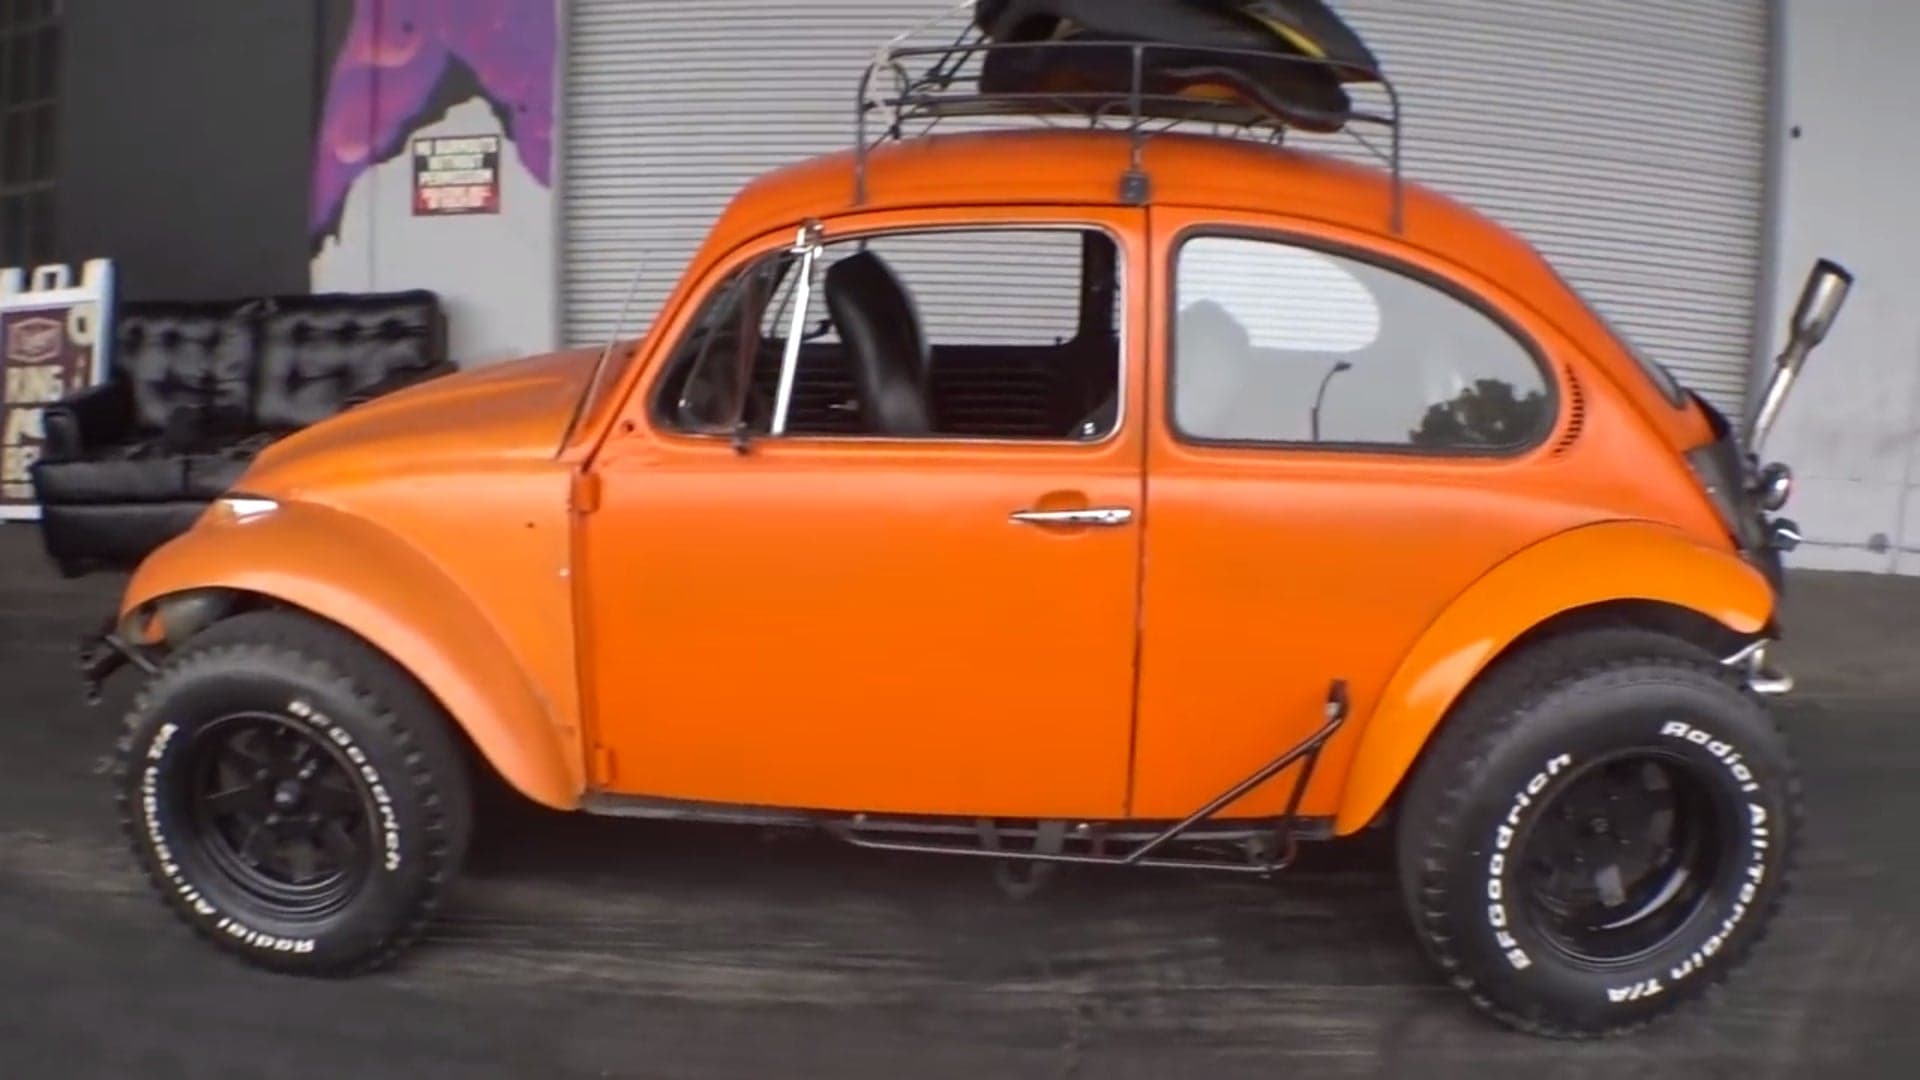 Hoonigan Purchases a $2,500 Baja Bug Known as the ‘ScumBug’